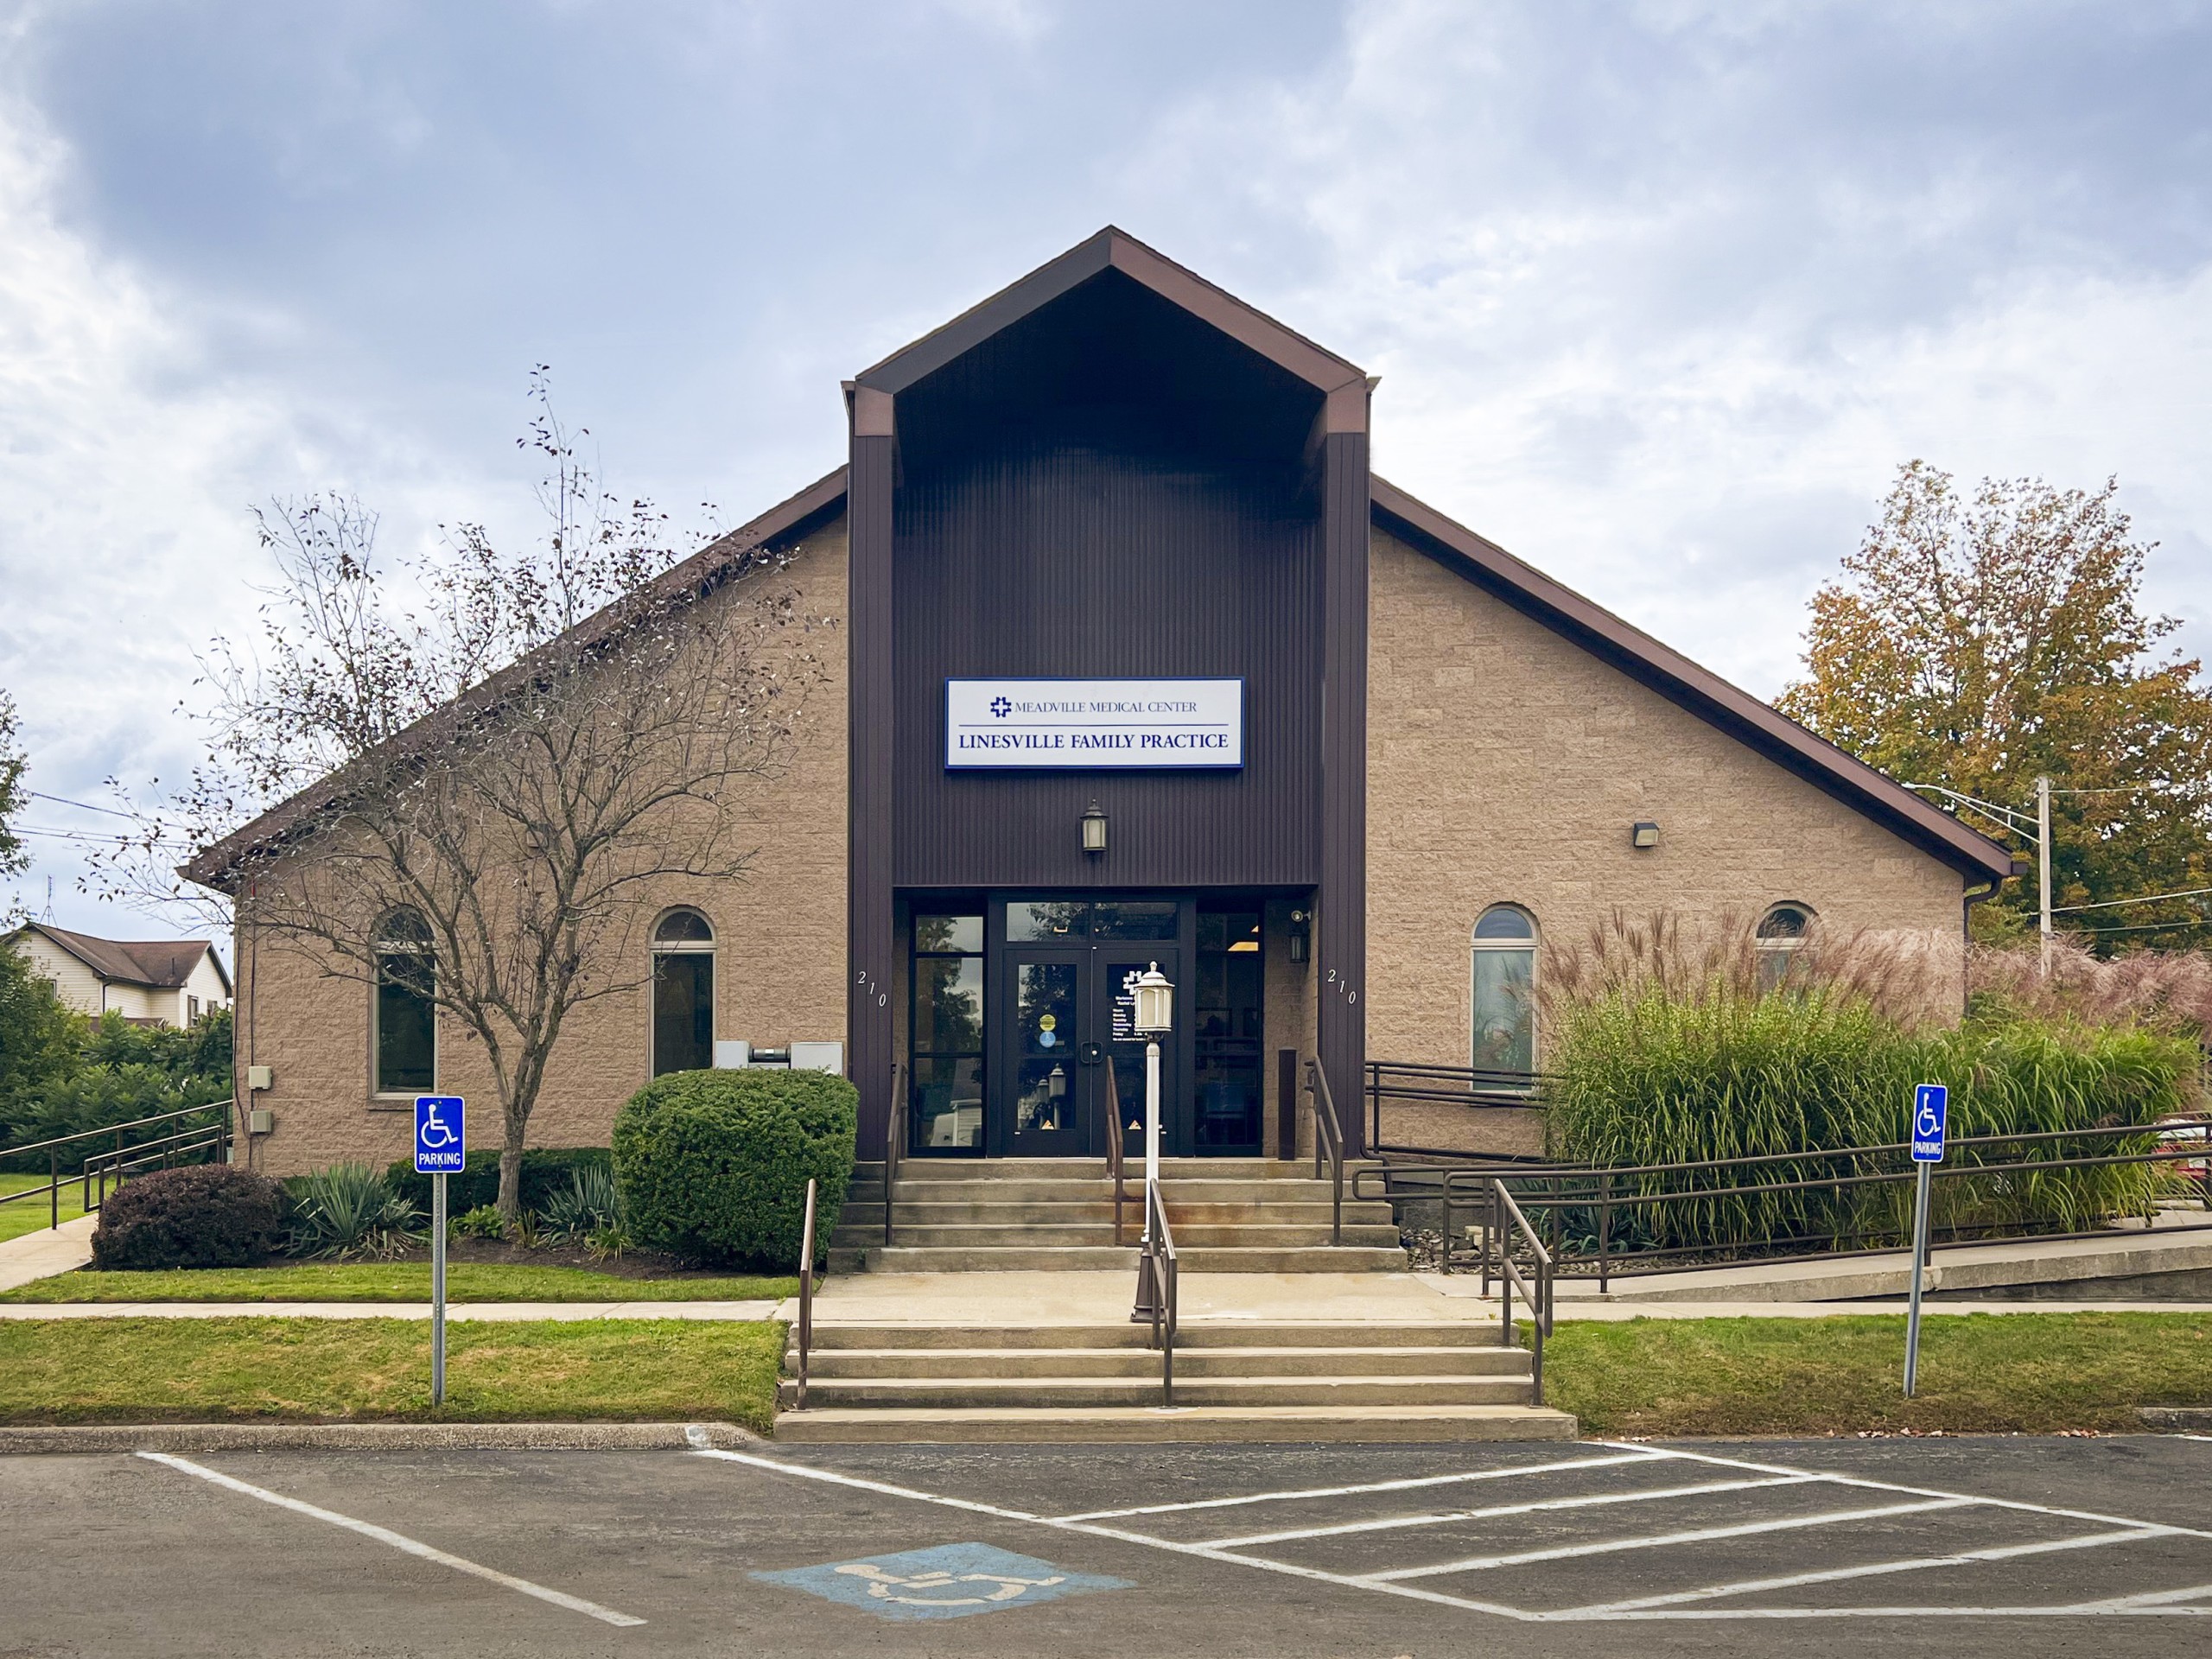 Exterior of Linesville Family Practice